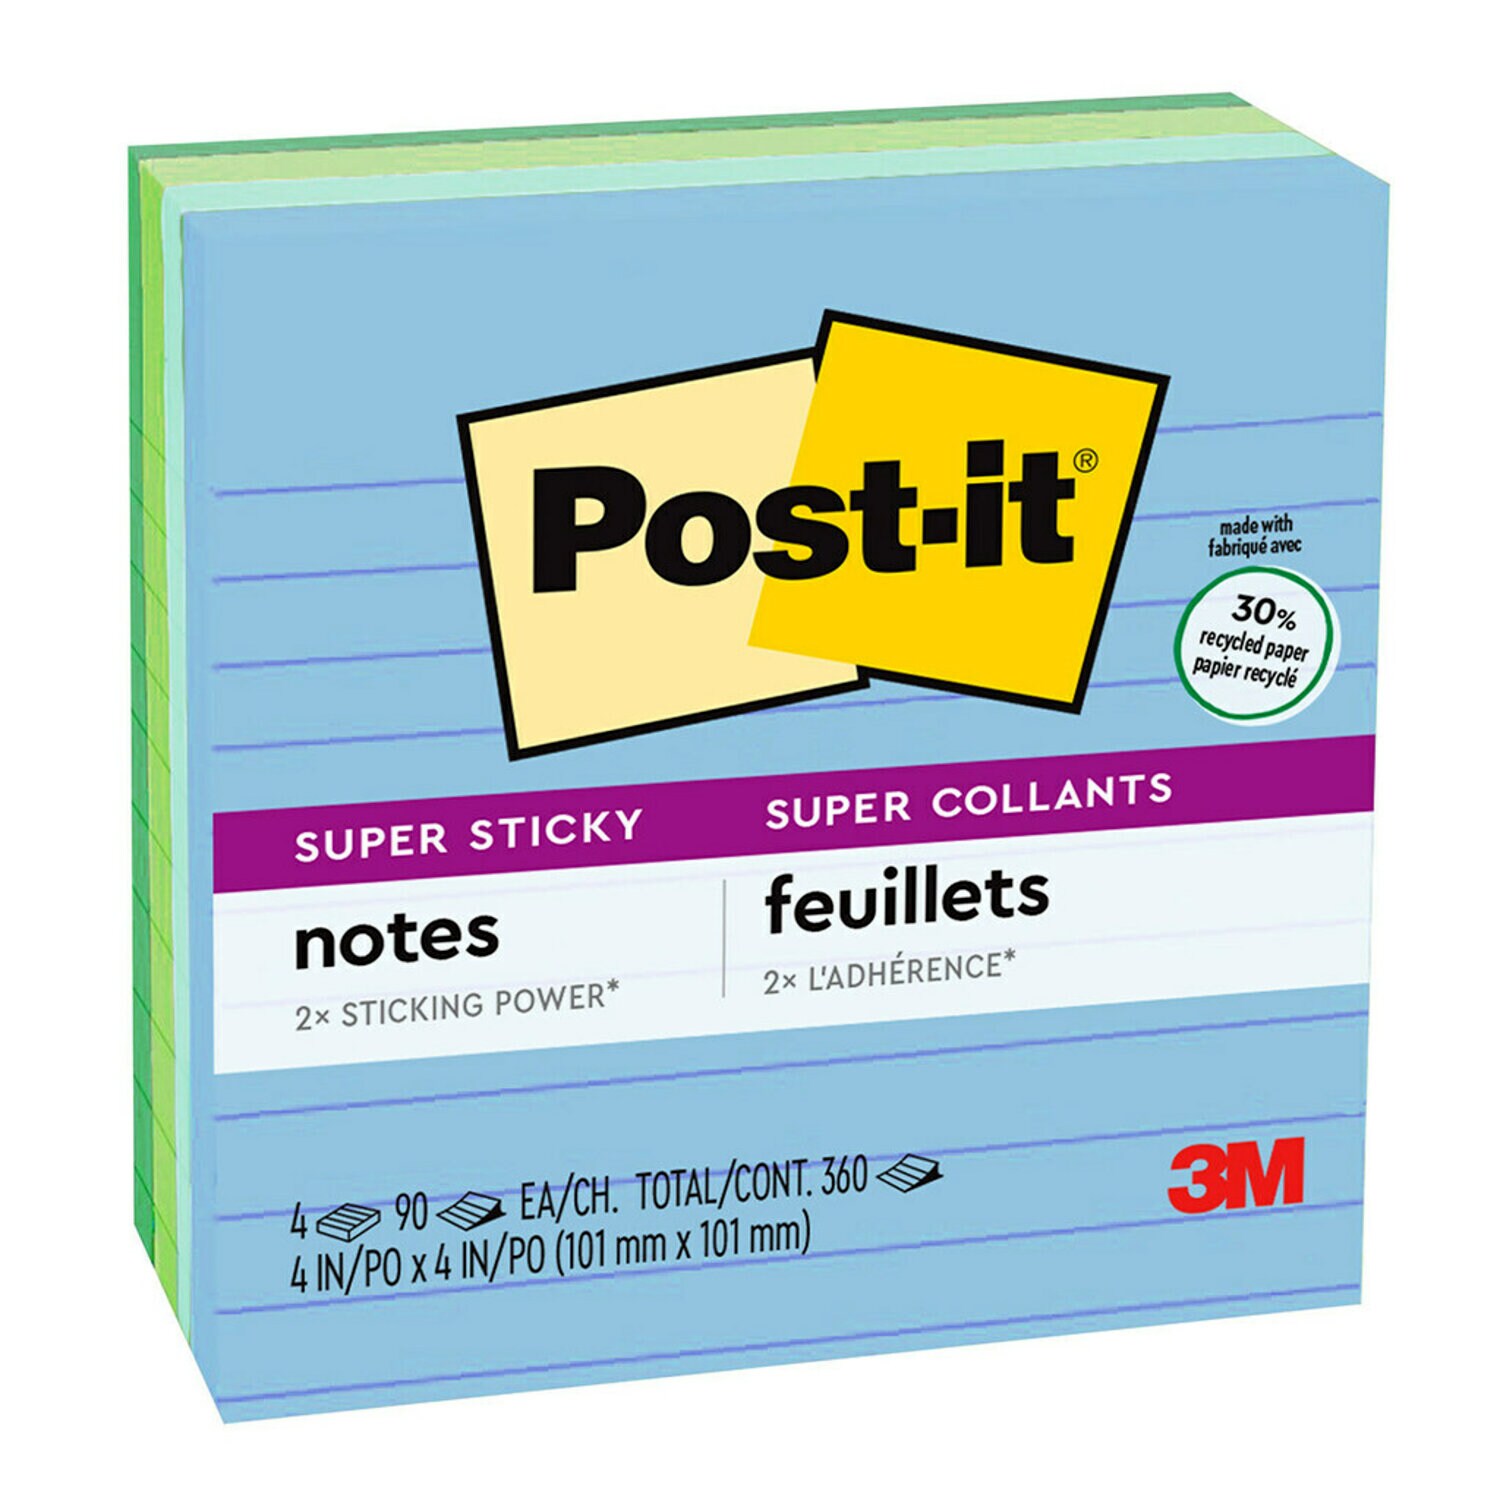 7010372301 - Post-it Super Sticky Recycled Notes 675-4SST, 4 in x 4 in (101 mm x 101 mm), Oasis Collection, Lined, 4 Pads/Pk